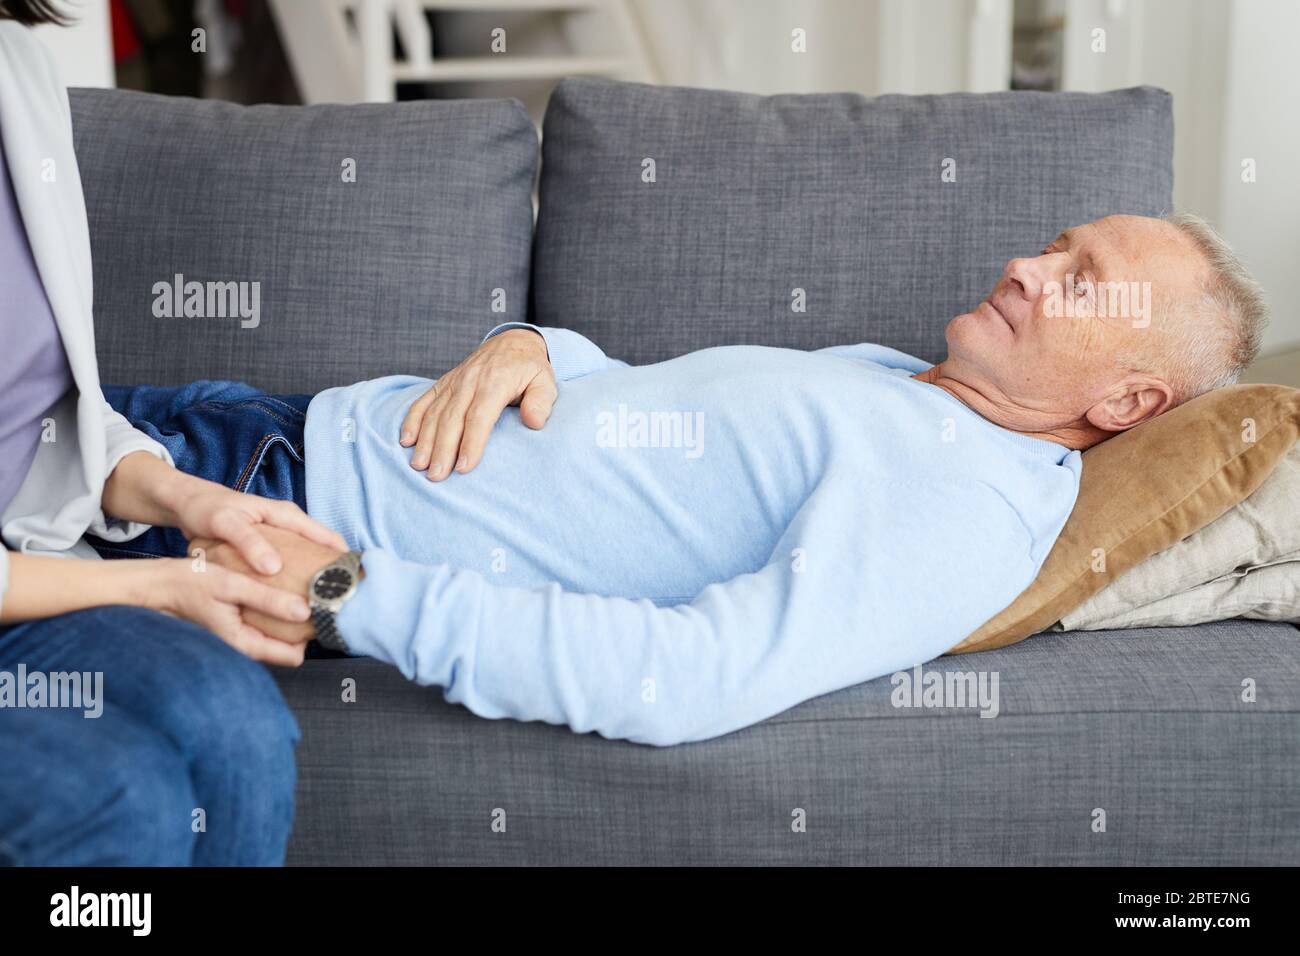 Side view portrait of senior man lying on couch with unrecognizable daughter holding his hand and supporting father, copy space Stock Photo